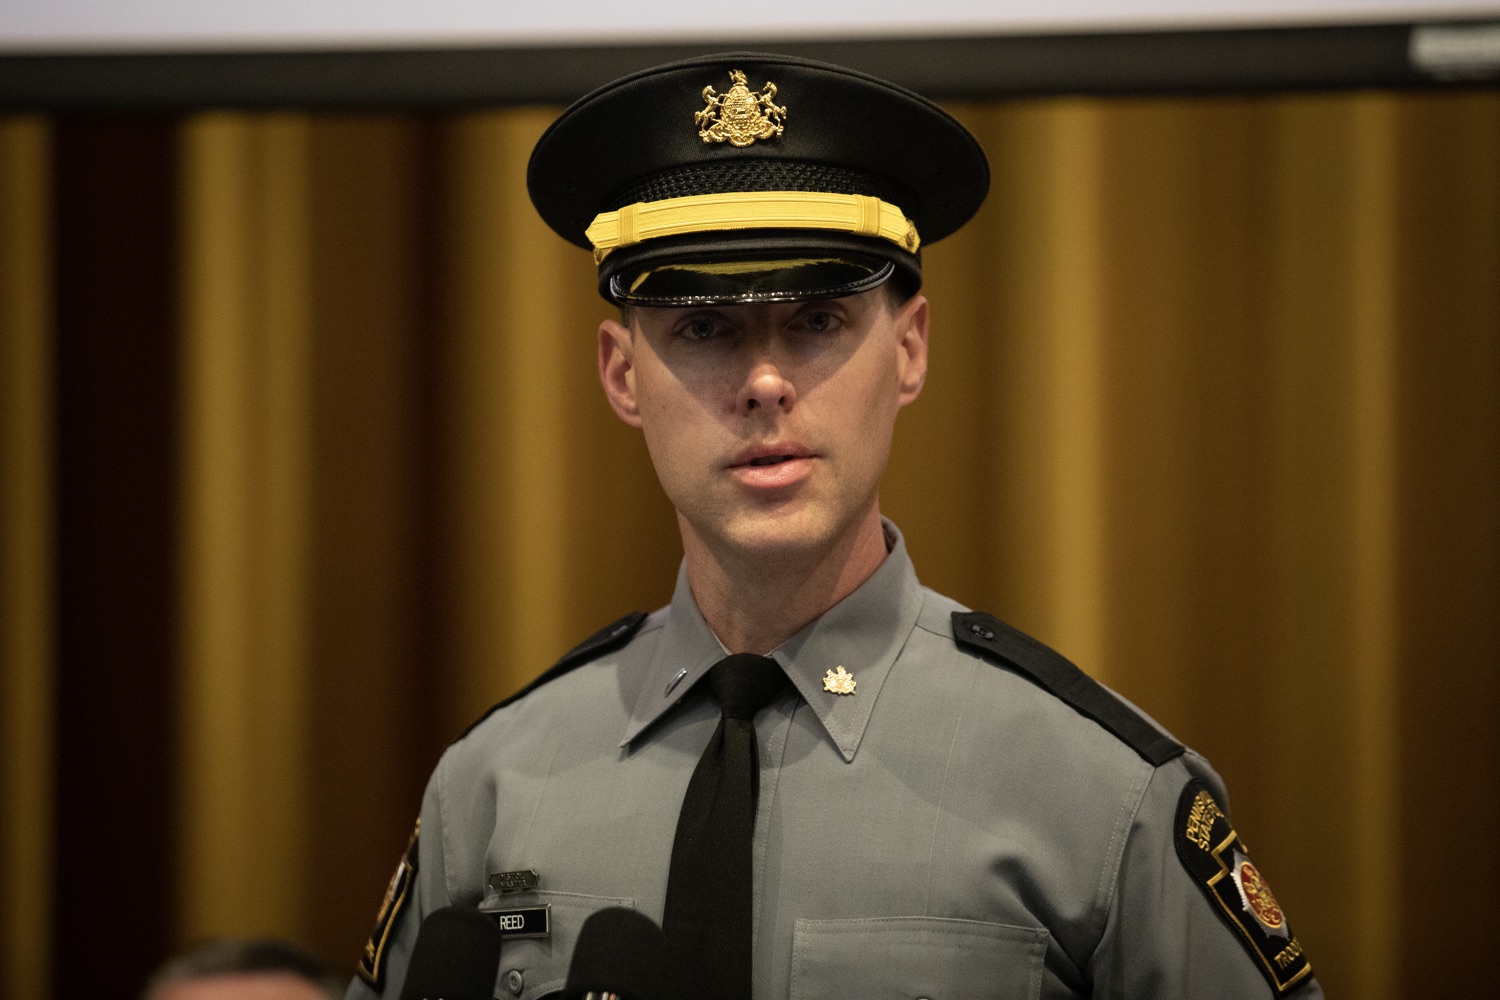 The Pennsylvania State Police joined Dr. Robin Engel of the National Policing Institute to present the 2022 findings of an independent study aimed at improving public safety, transparency, and policy by analyzing data from all traffic stops initiated by troopers. Pictured here is Lieutenant Adam Reed, delivering remarks at the joint press conference in Hershey, Pennsylvania. May 23, 2023.<br><a href="https://filesource.amperwave.net/commonwealthofpa/photo/23152_psp_contactData_JP_05.jpg" target="_blank">⇣ Download Photo</a>